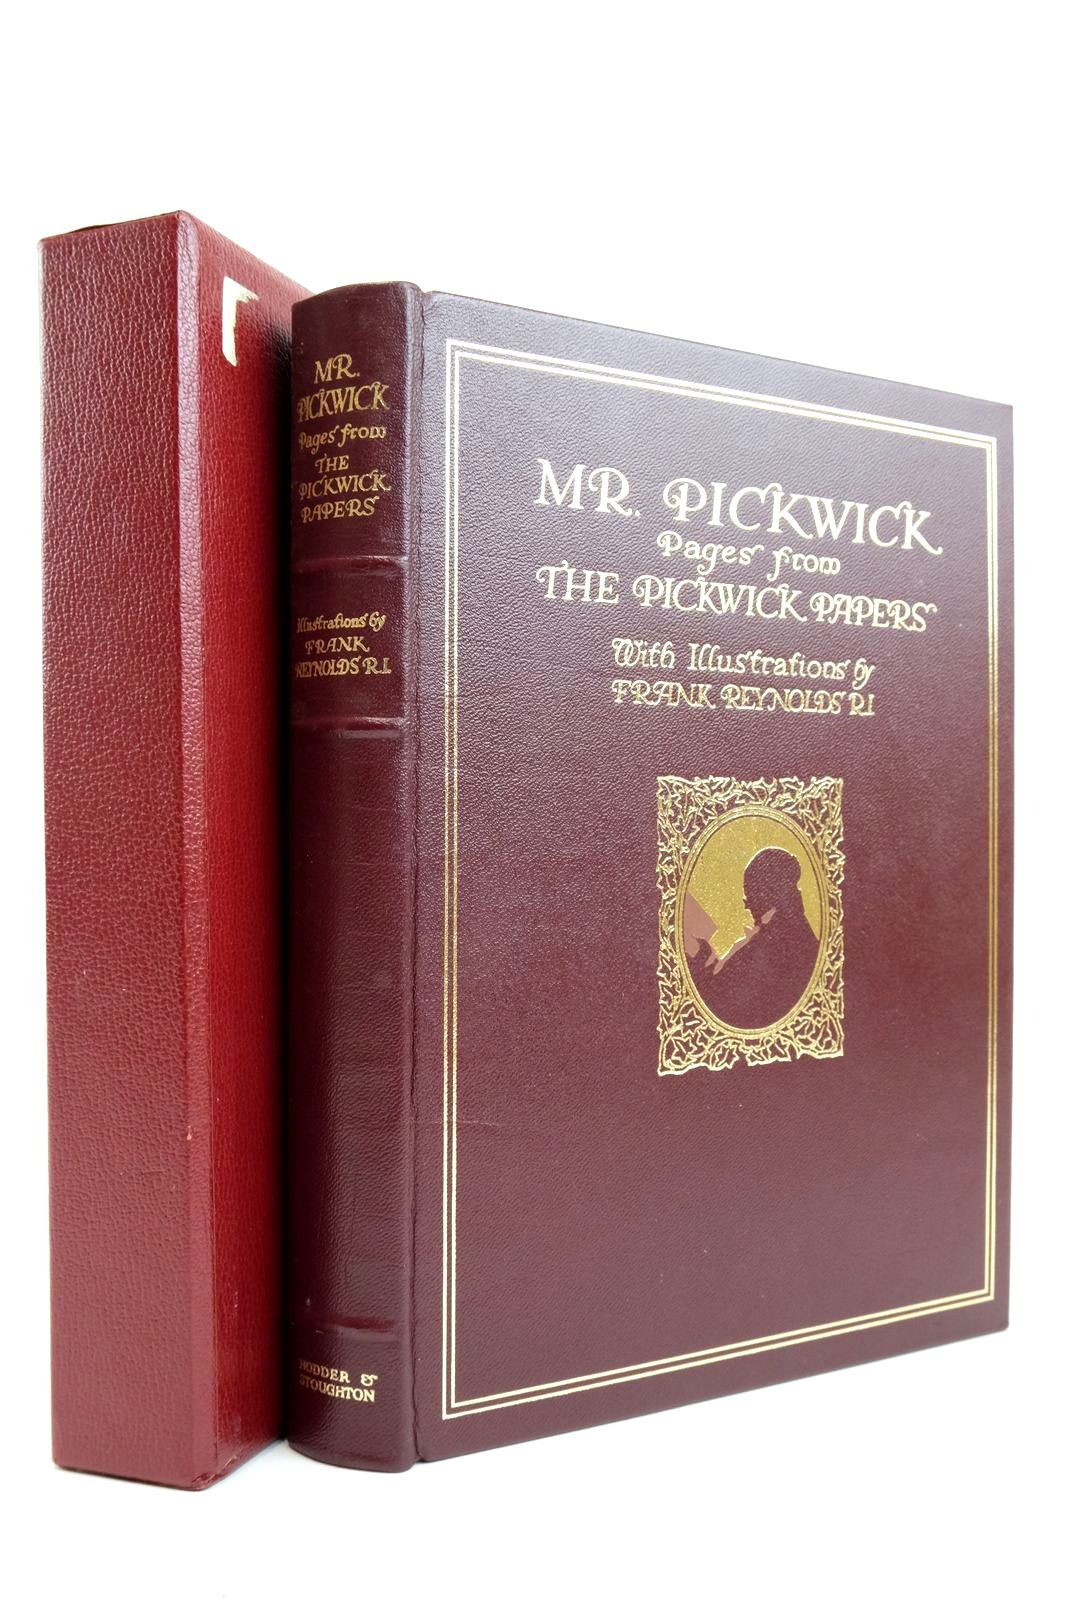 Photo of MR PICKWICK PAGES FROM THE PICKWICK PAPERS- Stock Number: 2135912